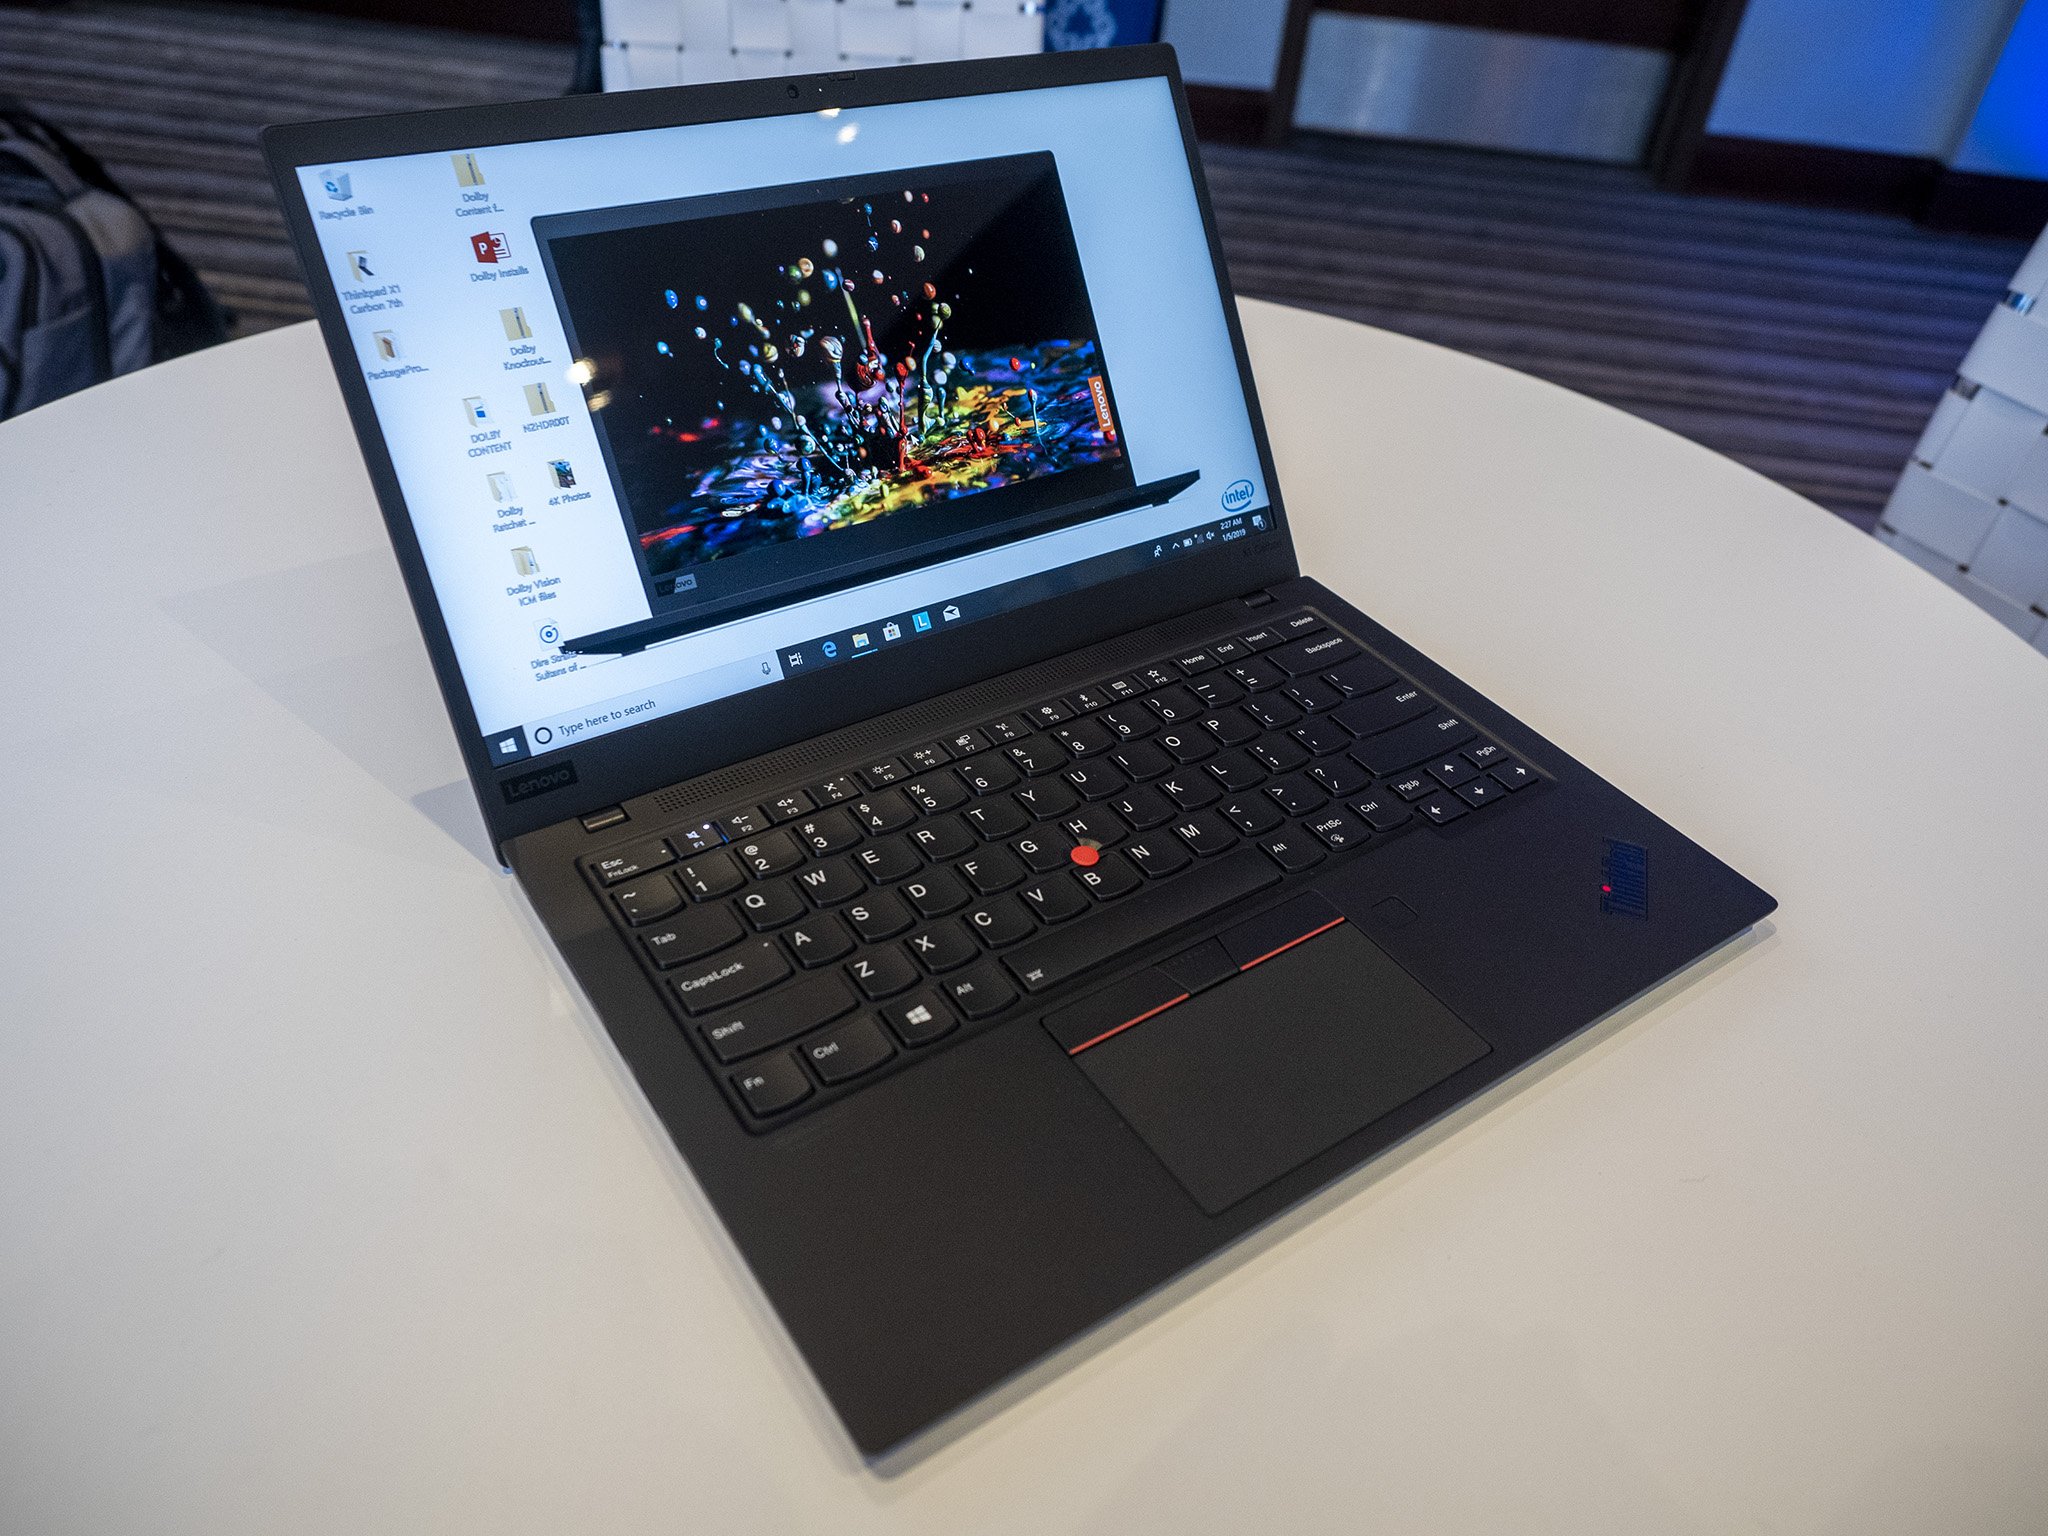 Lenovo ThinkPad X1 Carbon gets new coat of paint, better speakers 